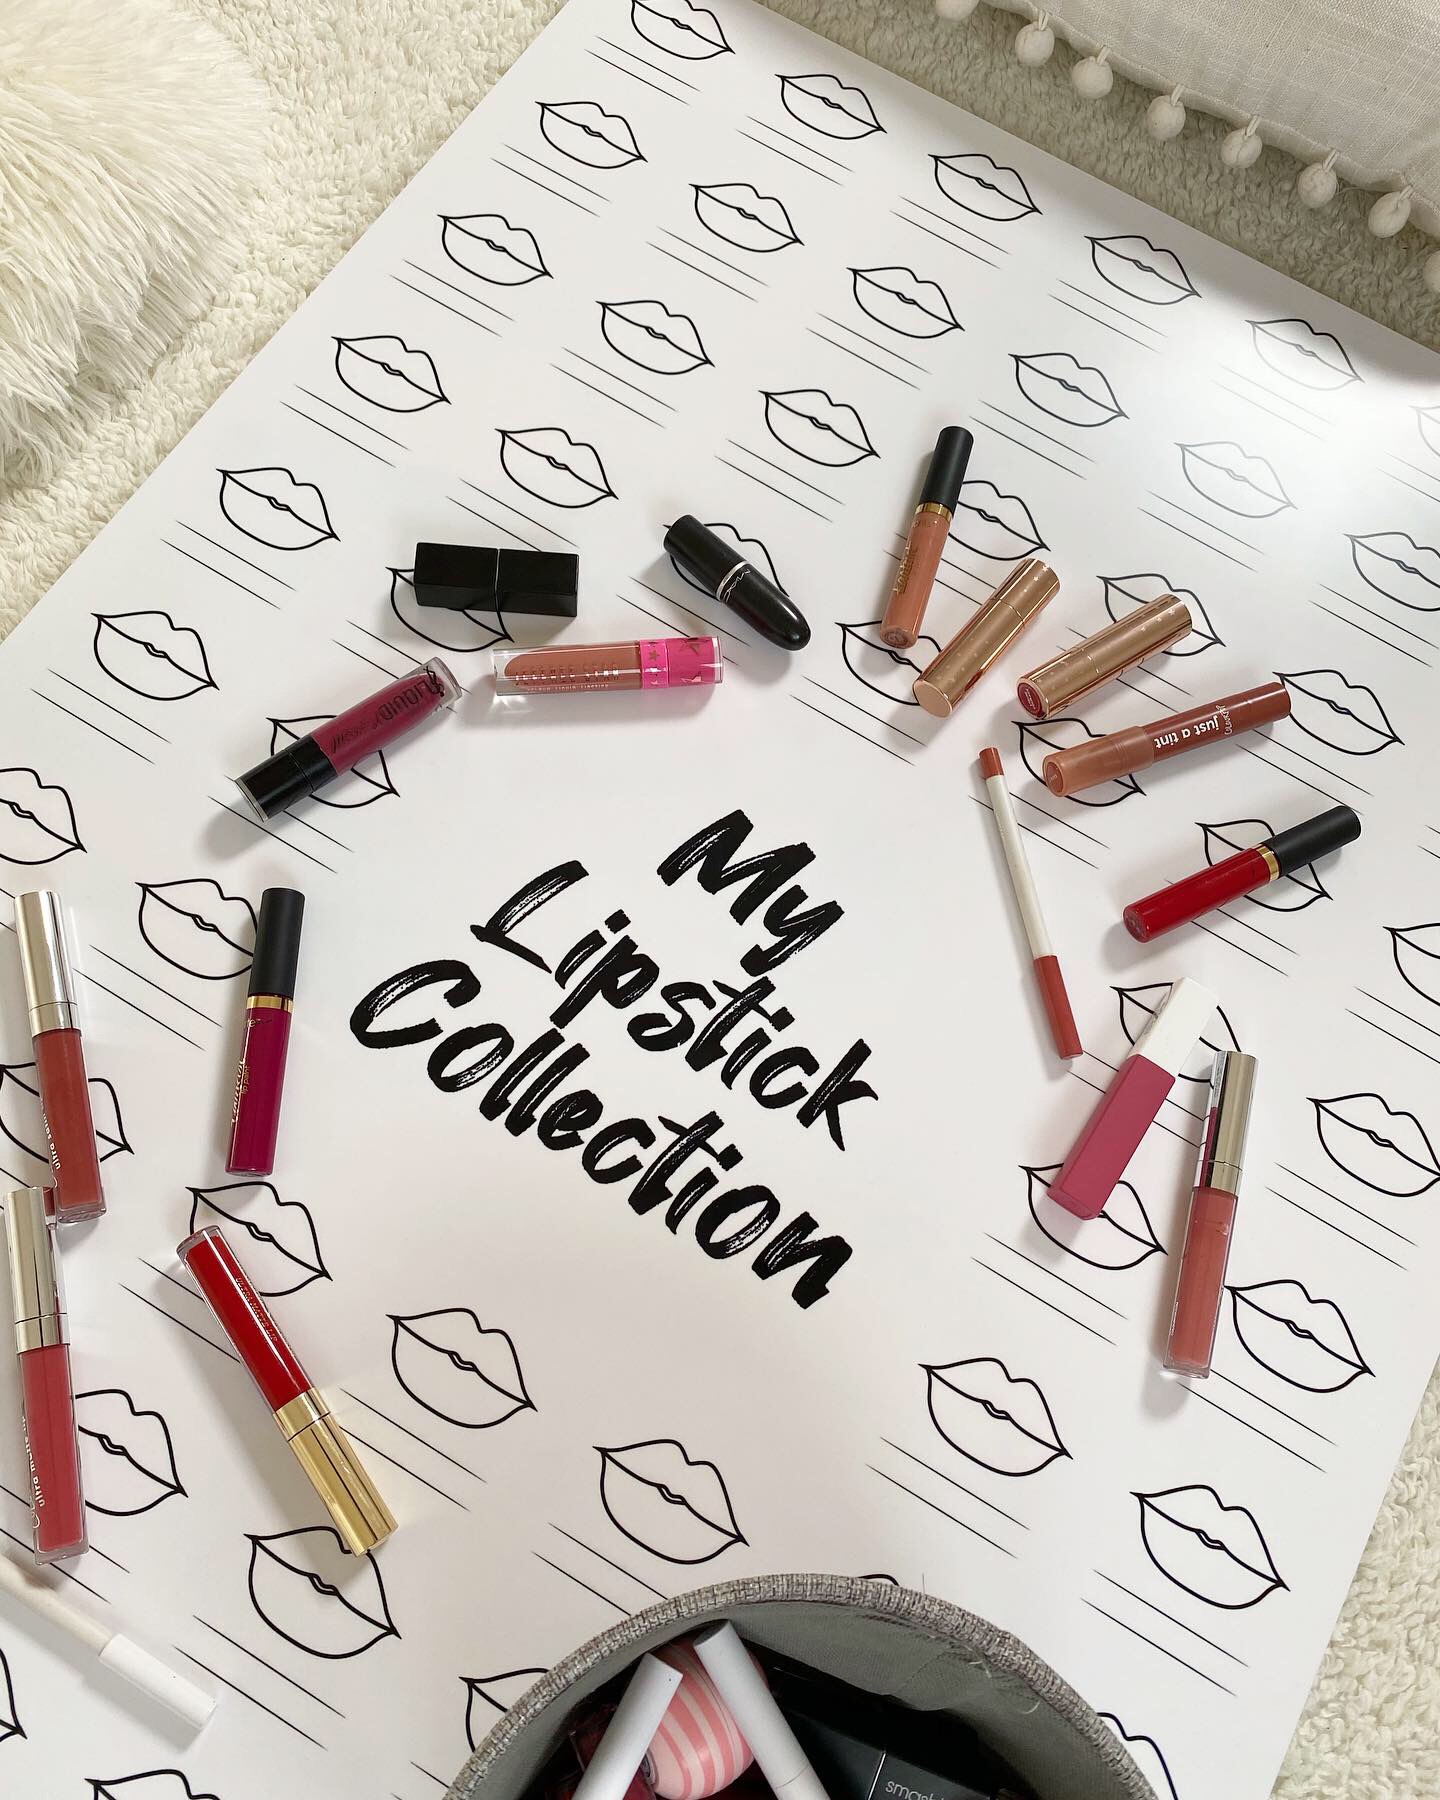 Lipsticks are such game-changers!